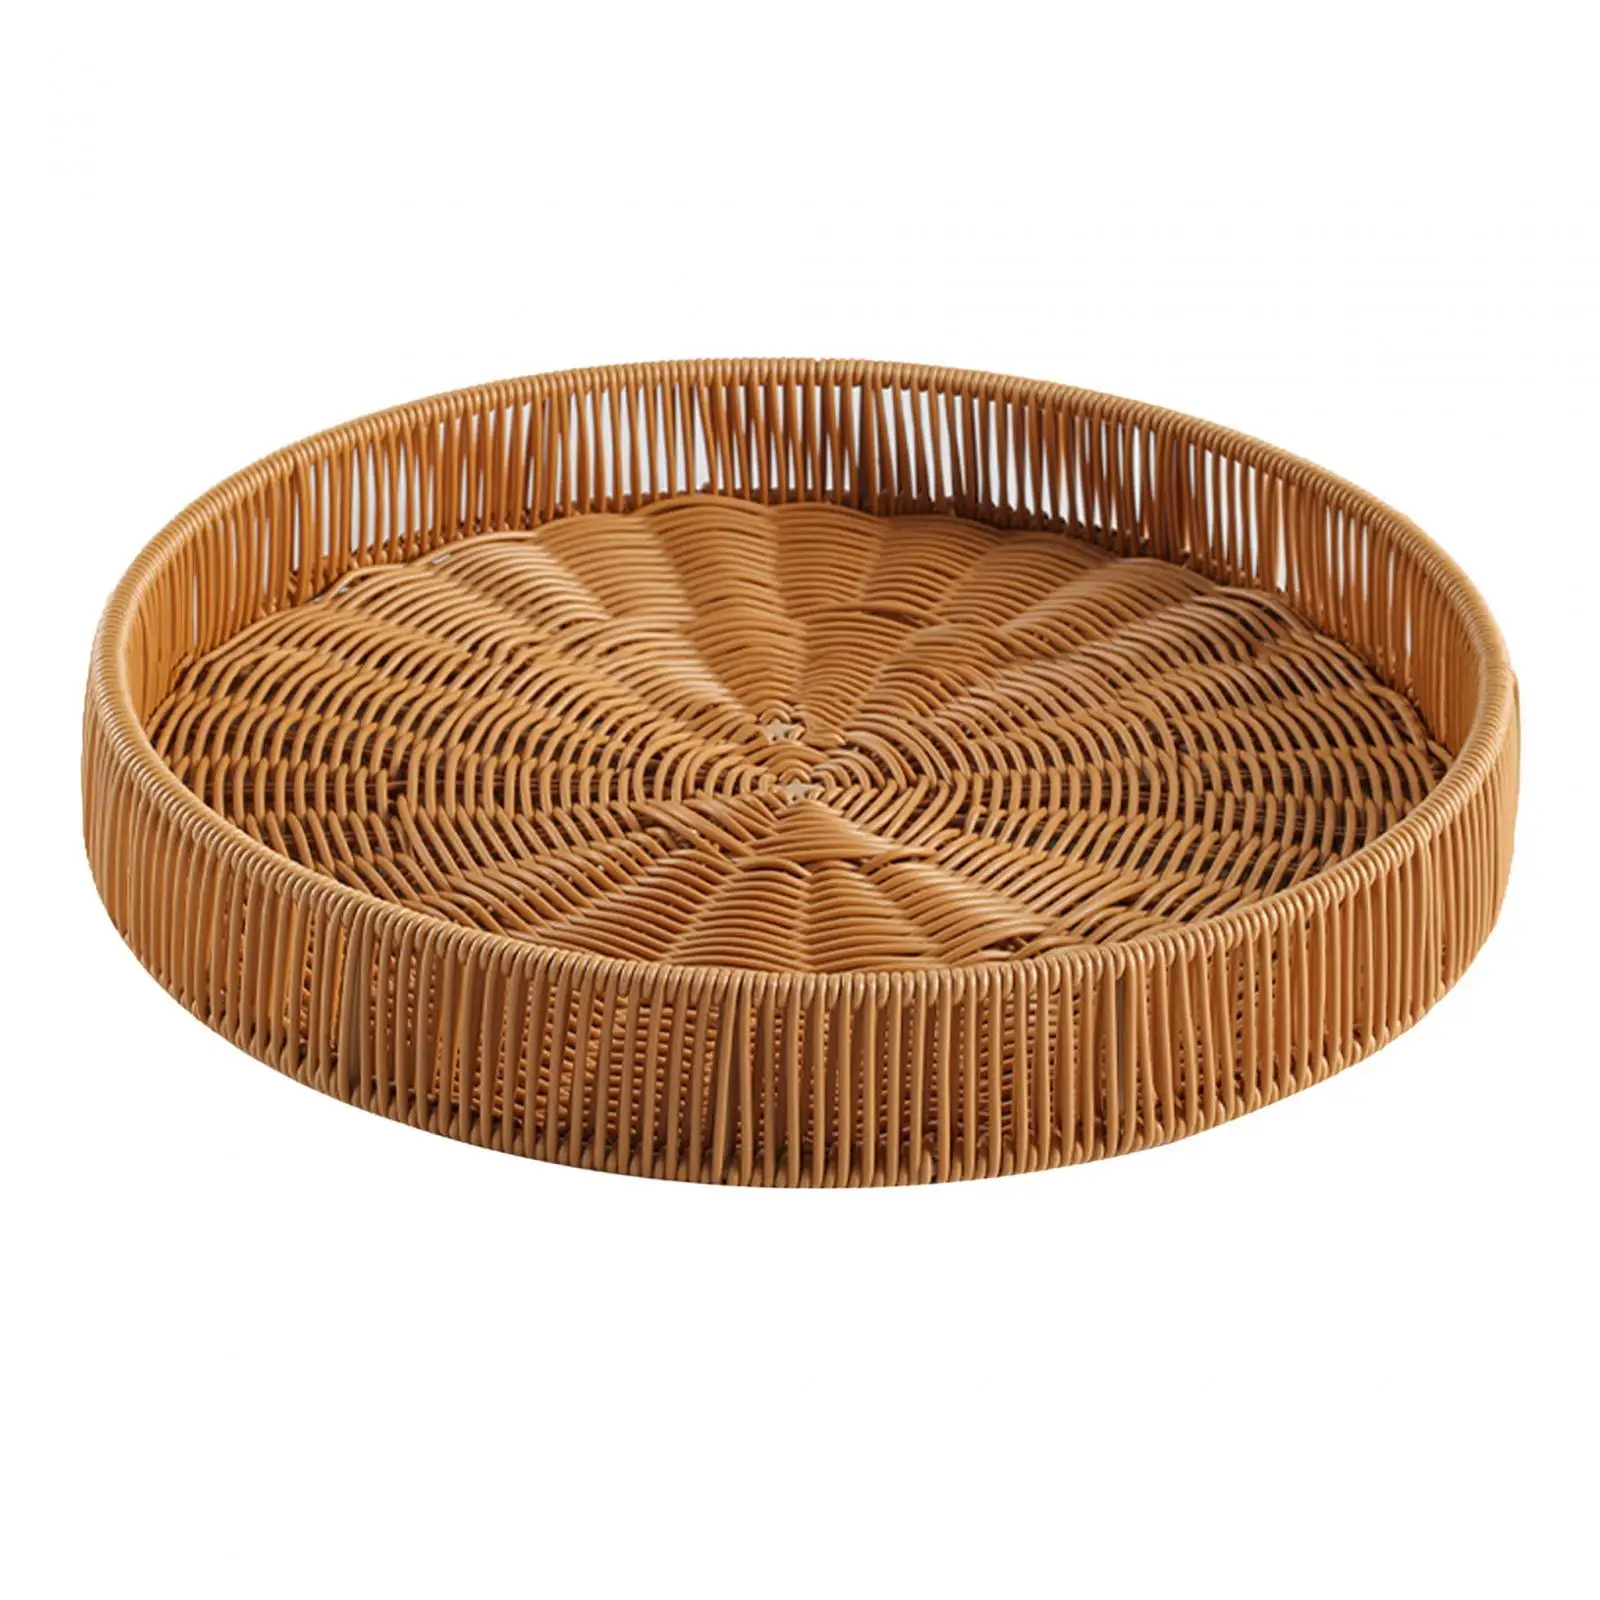 Hand Woven Serving Tray Organizer Rustic Imitation Rattan Tray Ottoman Trays Bread Basket for Candy Bread Fruits Vegetables